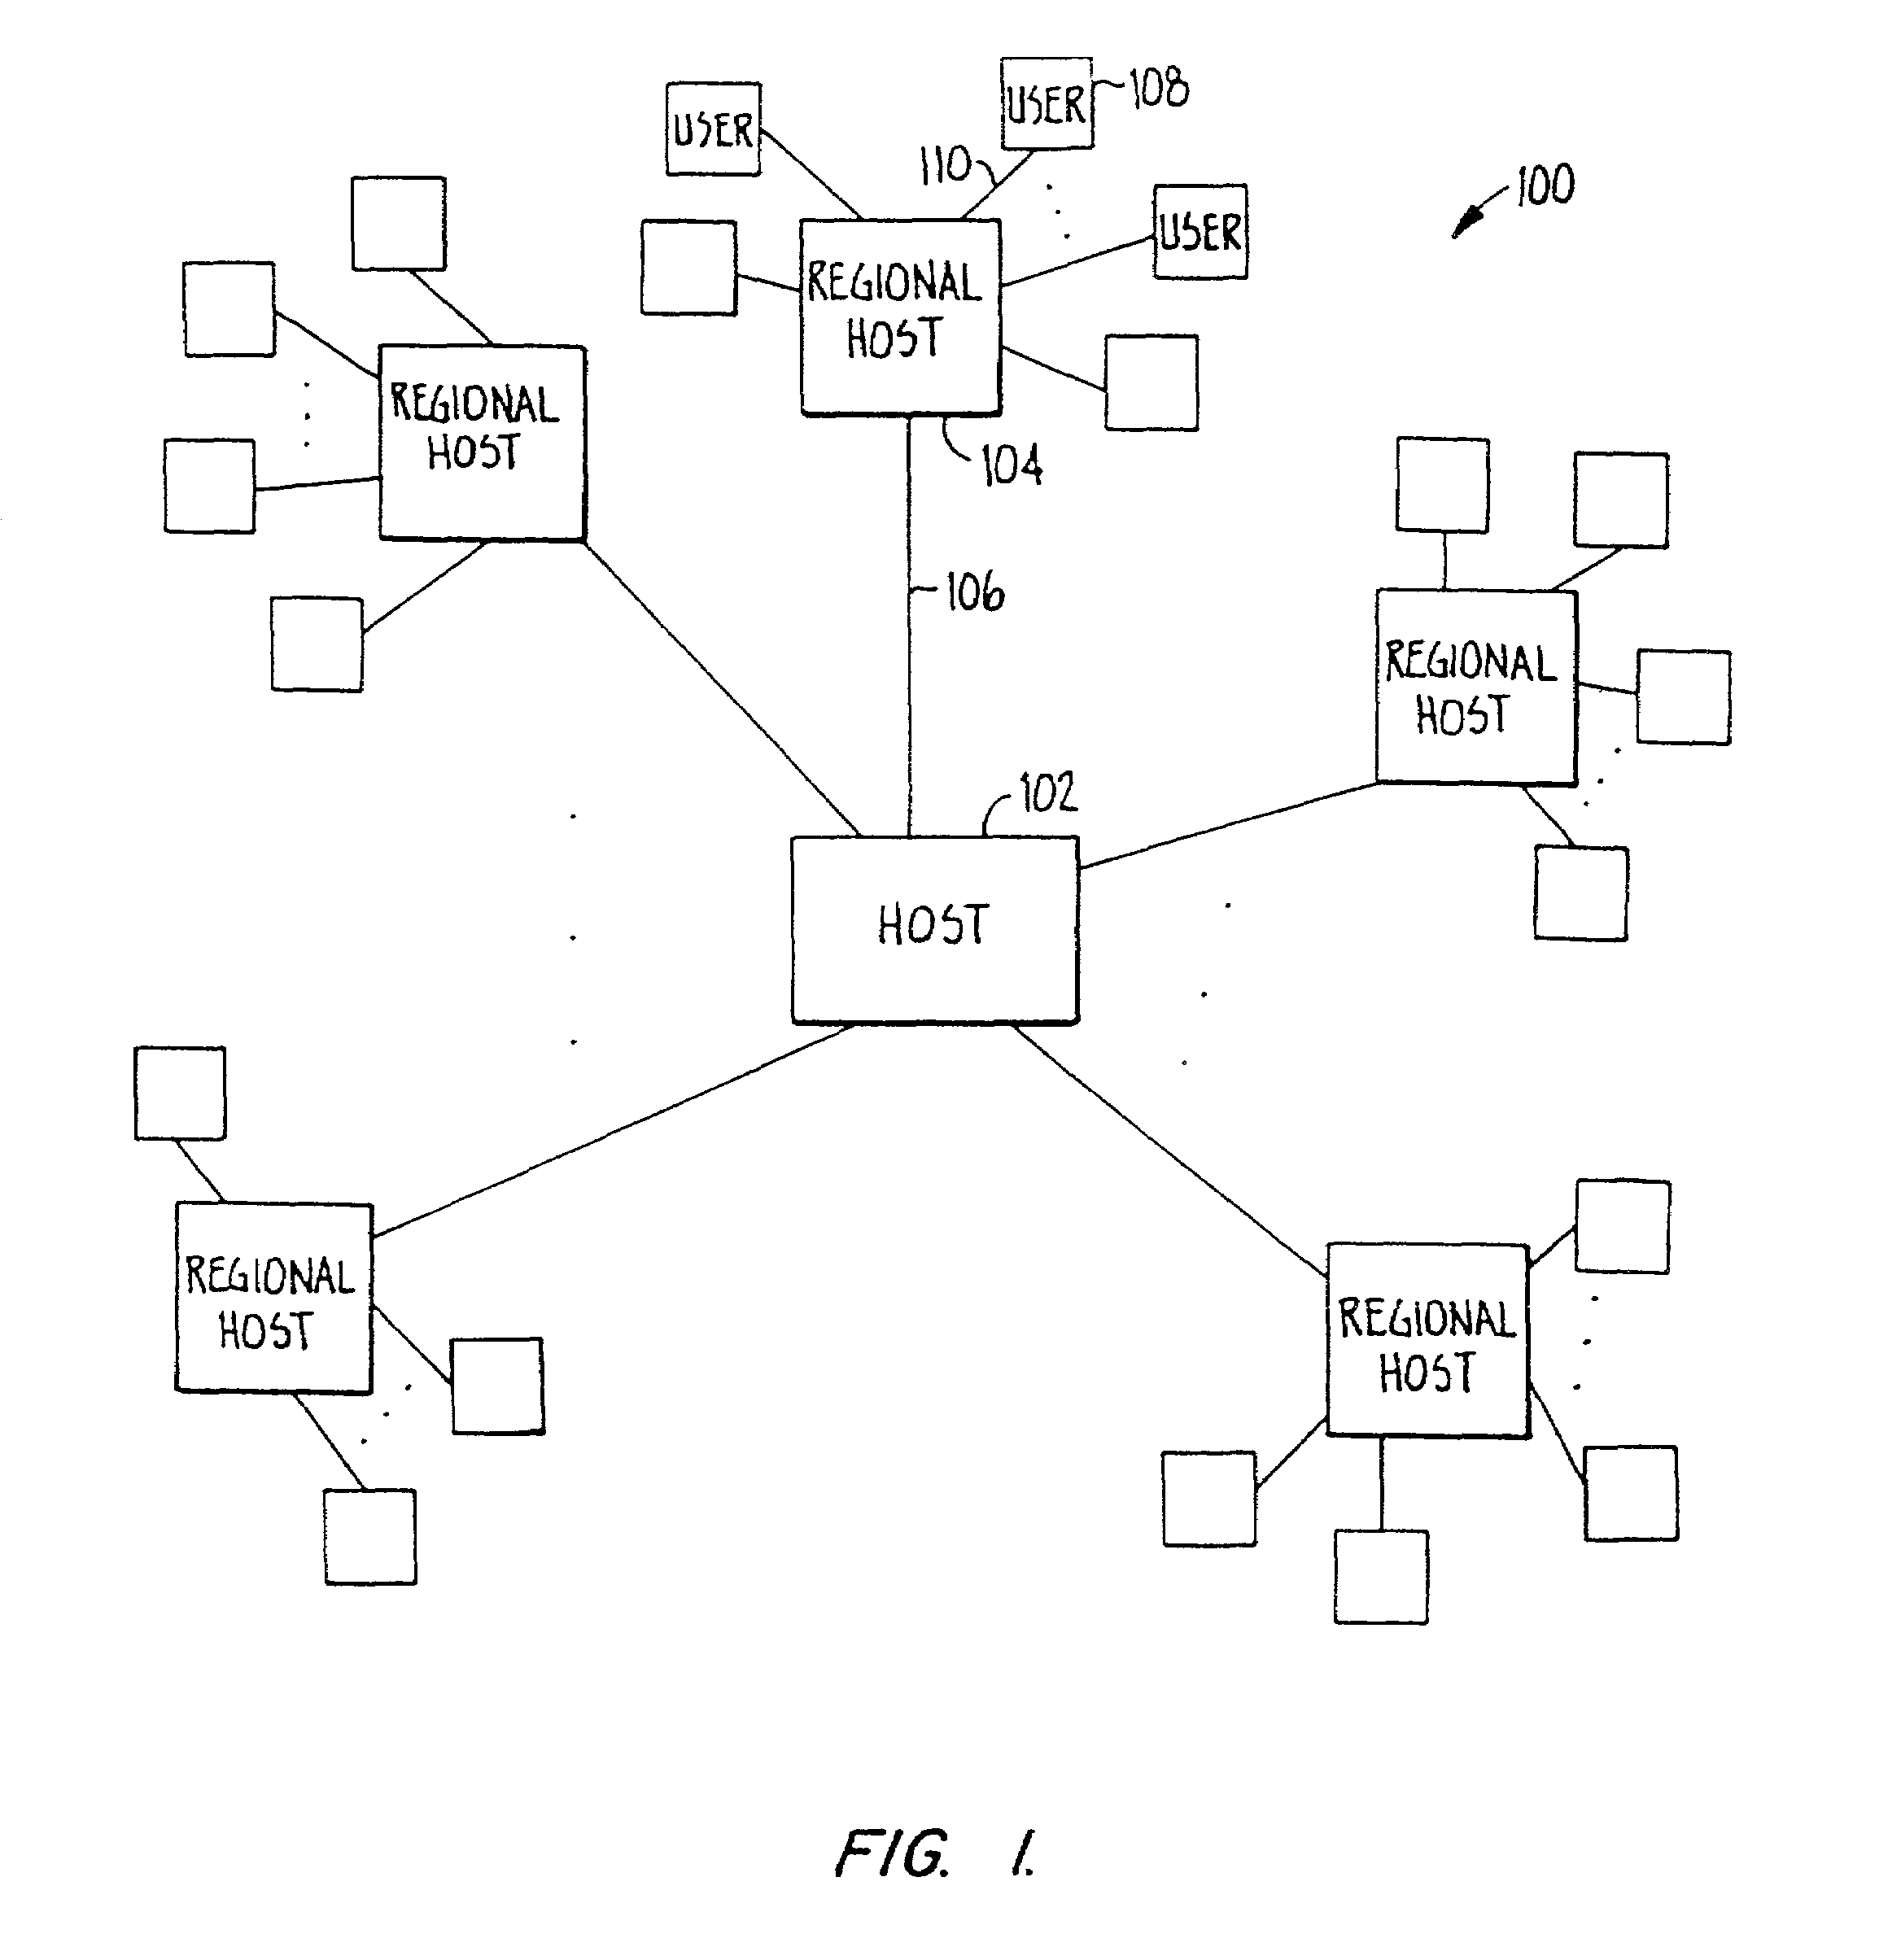 Method and apparatus for recommending selections based on preferences in a multi-user system